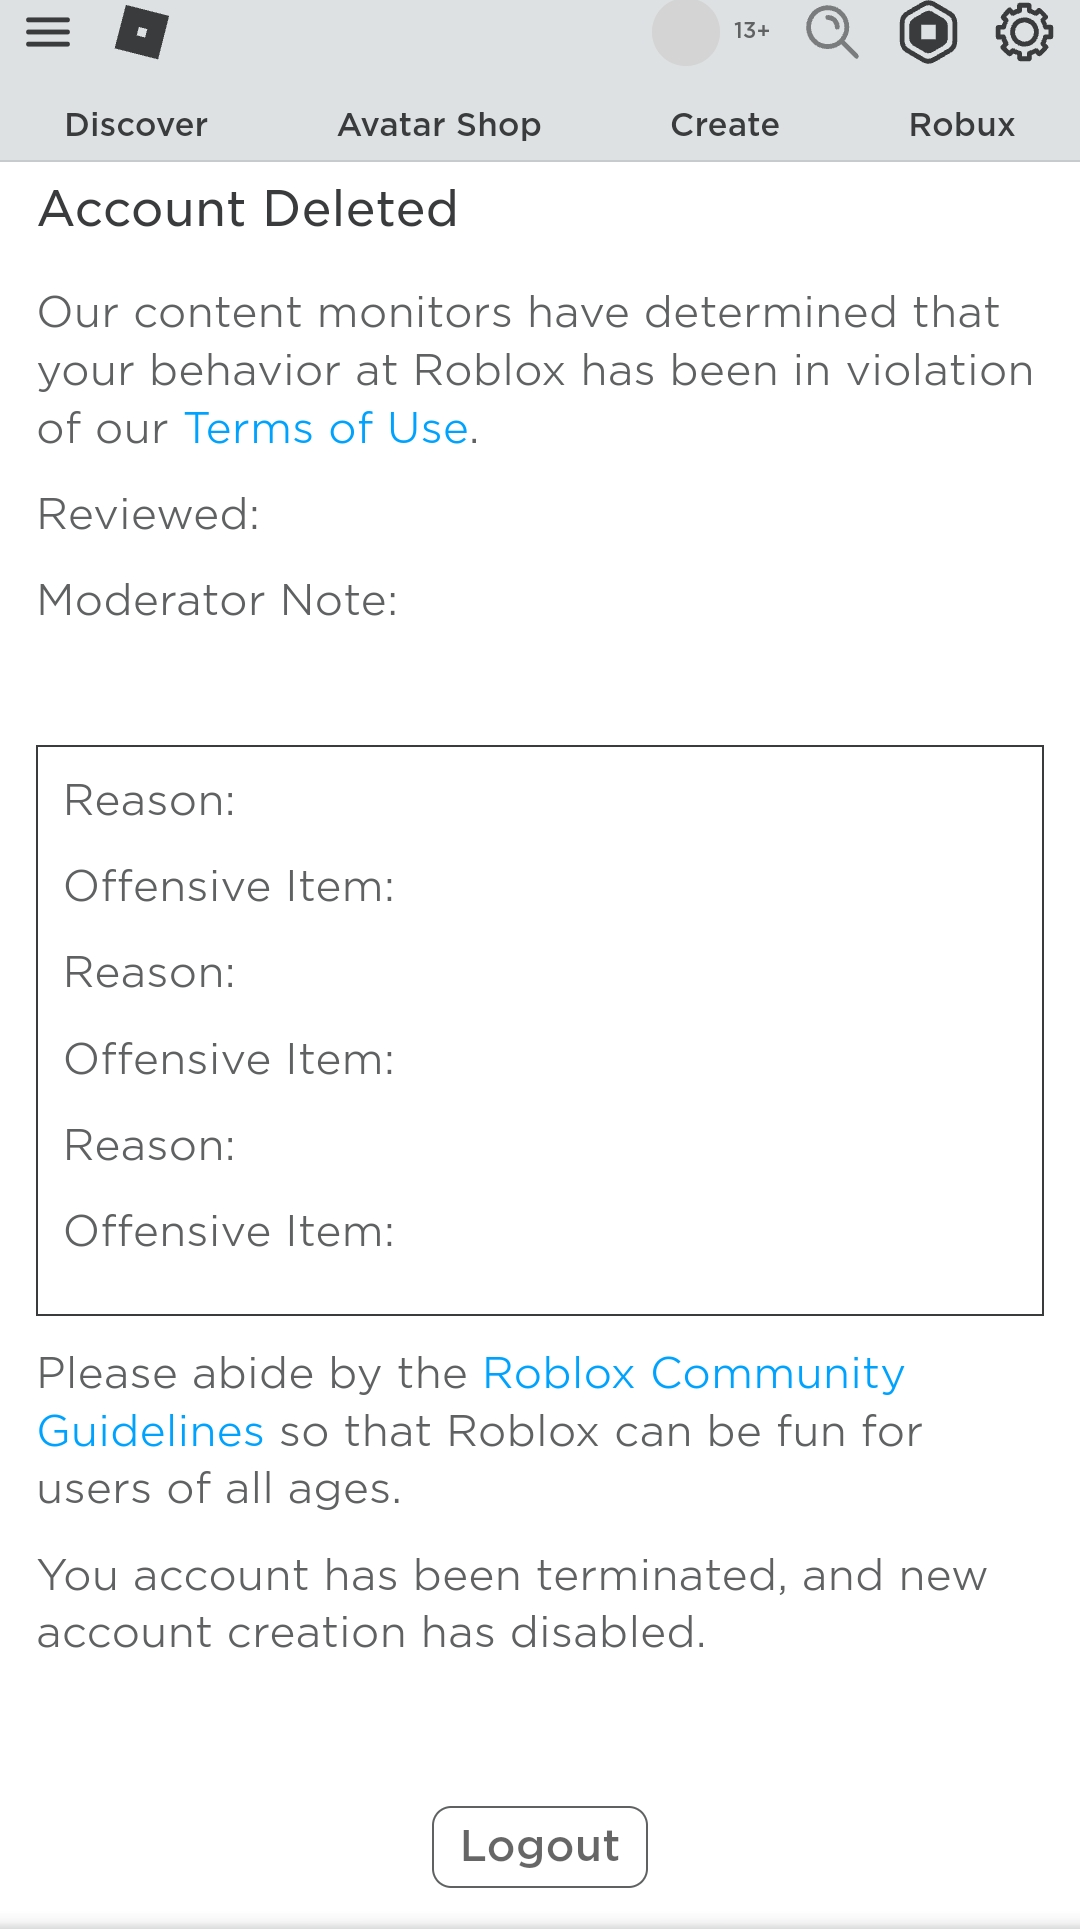 Poison banned from roblox Blank Meme Template